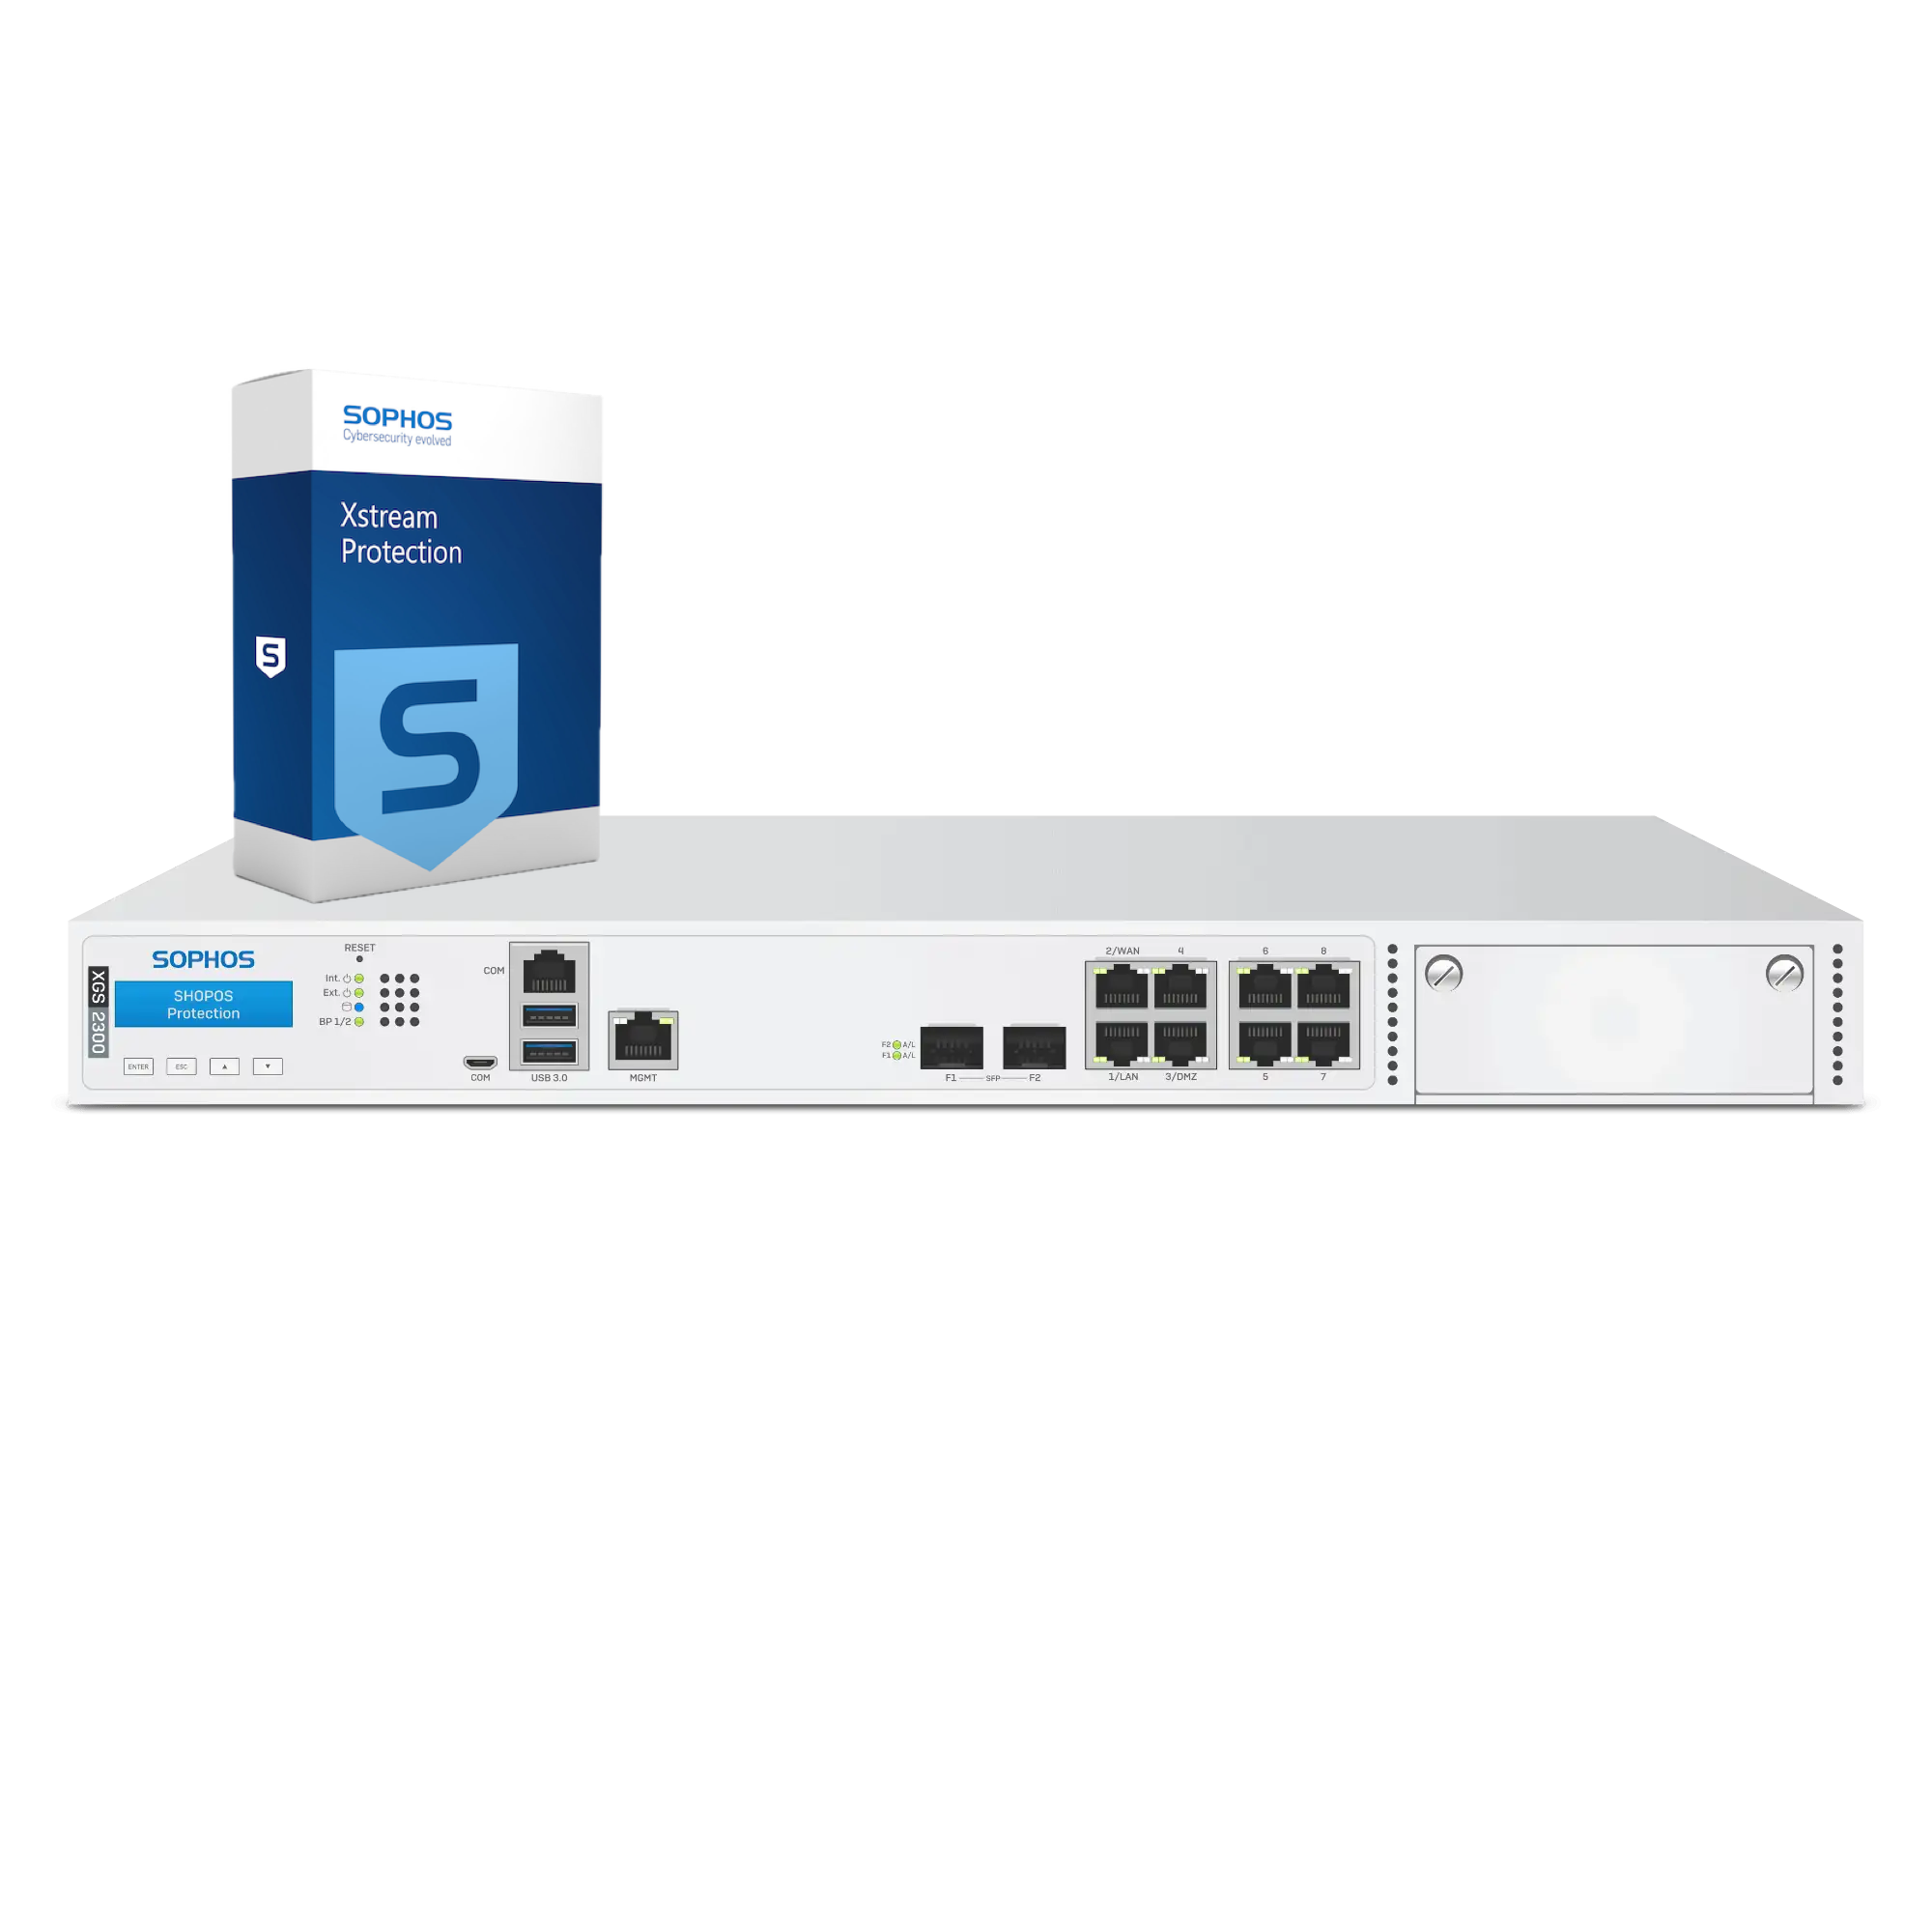 Sophos XGS 2300 Firewall with Xstream Protection, 1-year - EU power cord